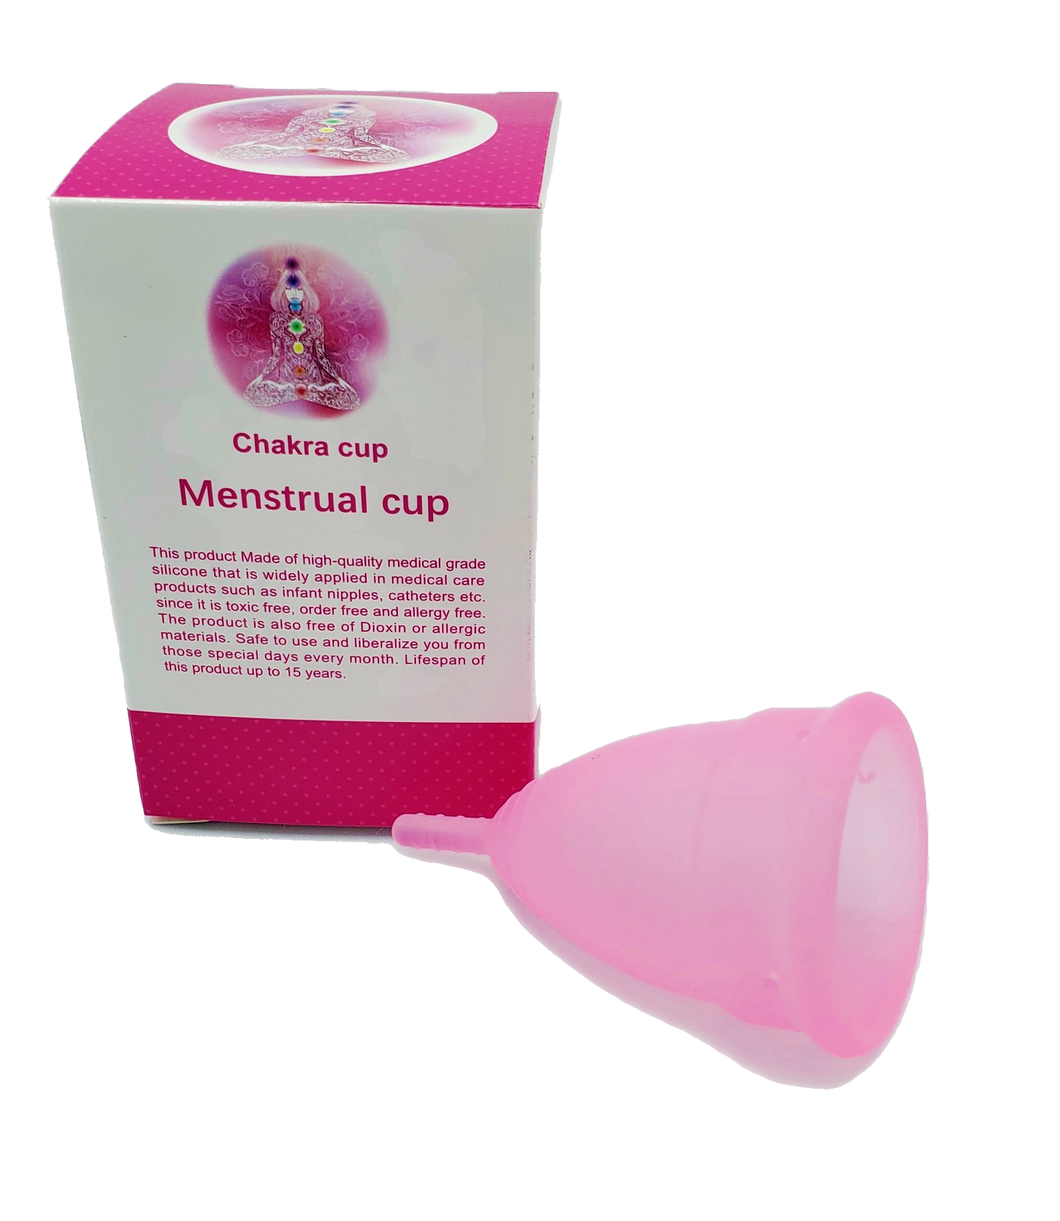 Menstrual Cup Reusable Period Cup-Pink- Size Large